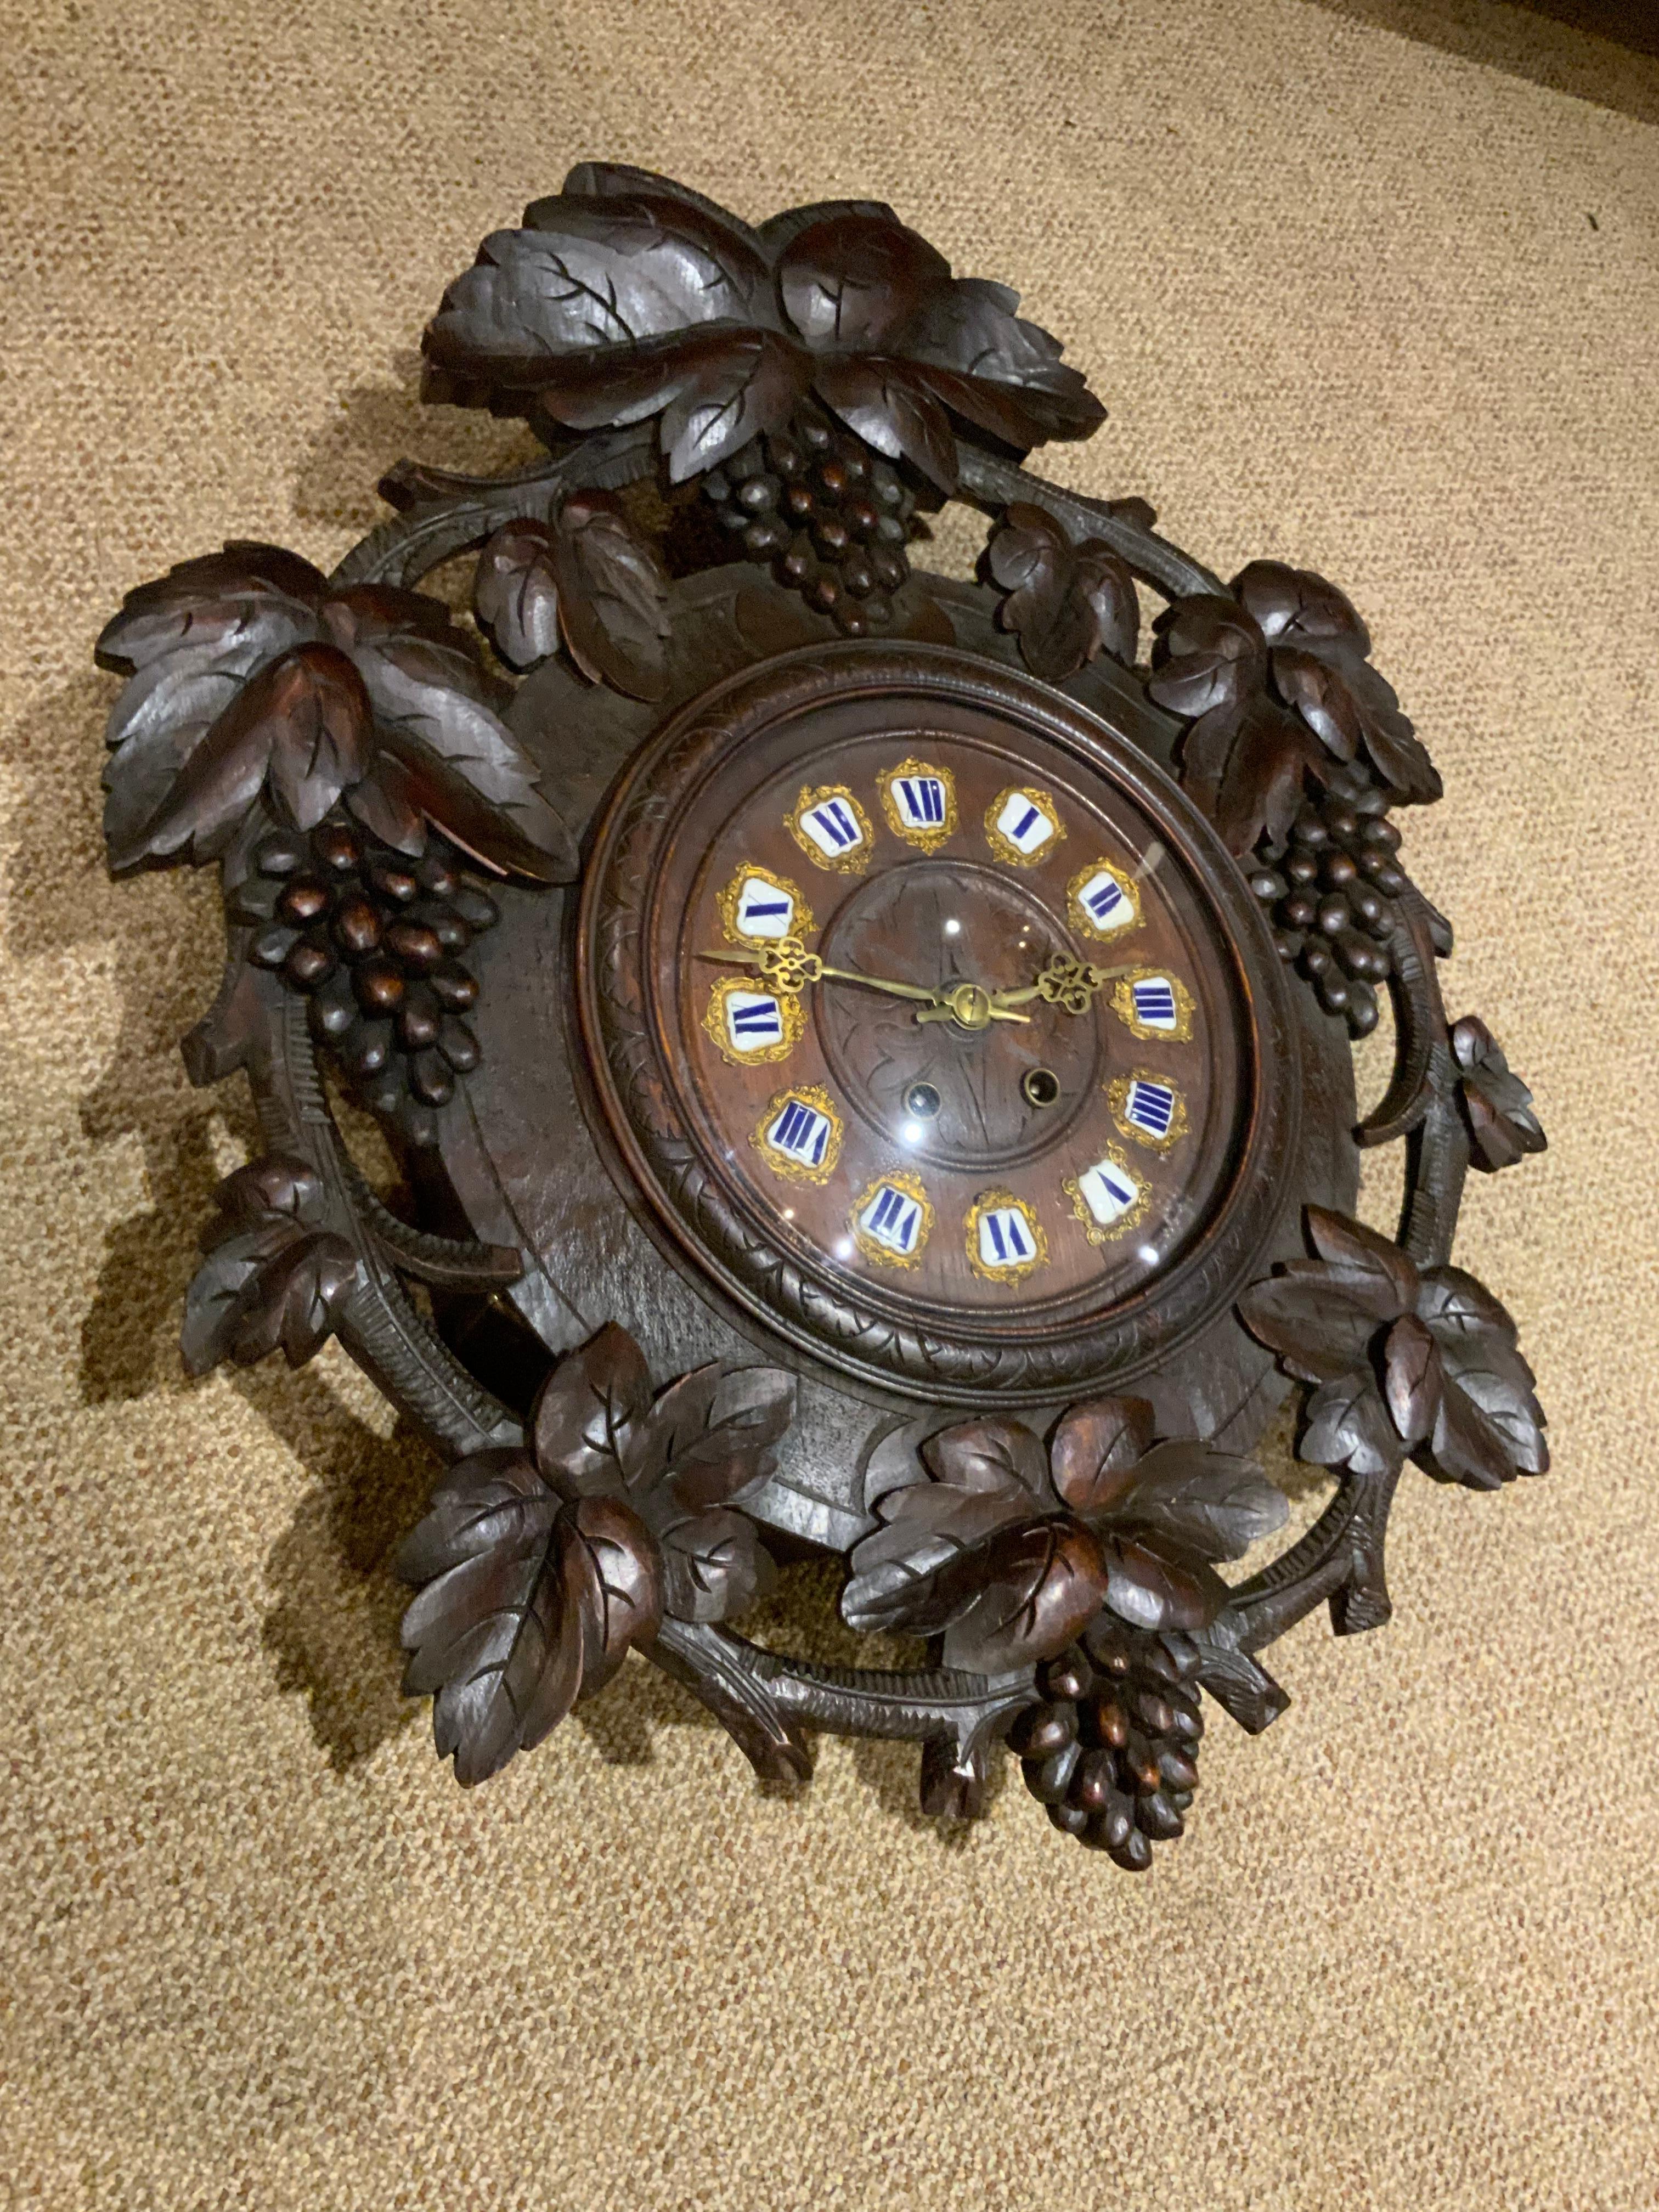 This handsome clock is beautifully carved with grapes and oak leaves
Around the face of the clock. It has the key and pendulum and
The spring is good. The face lifts for winding. The numerals are in
A white and blue enamel. This type carving is